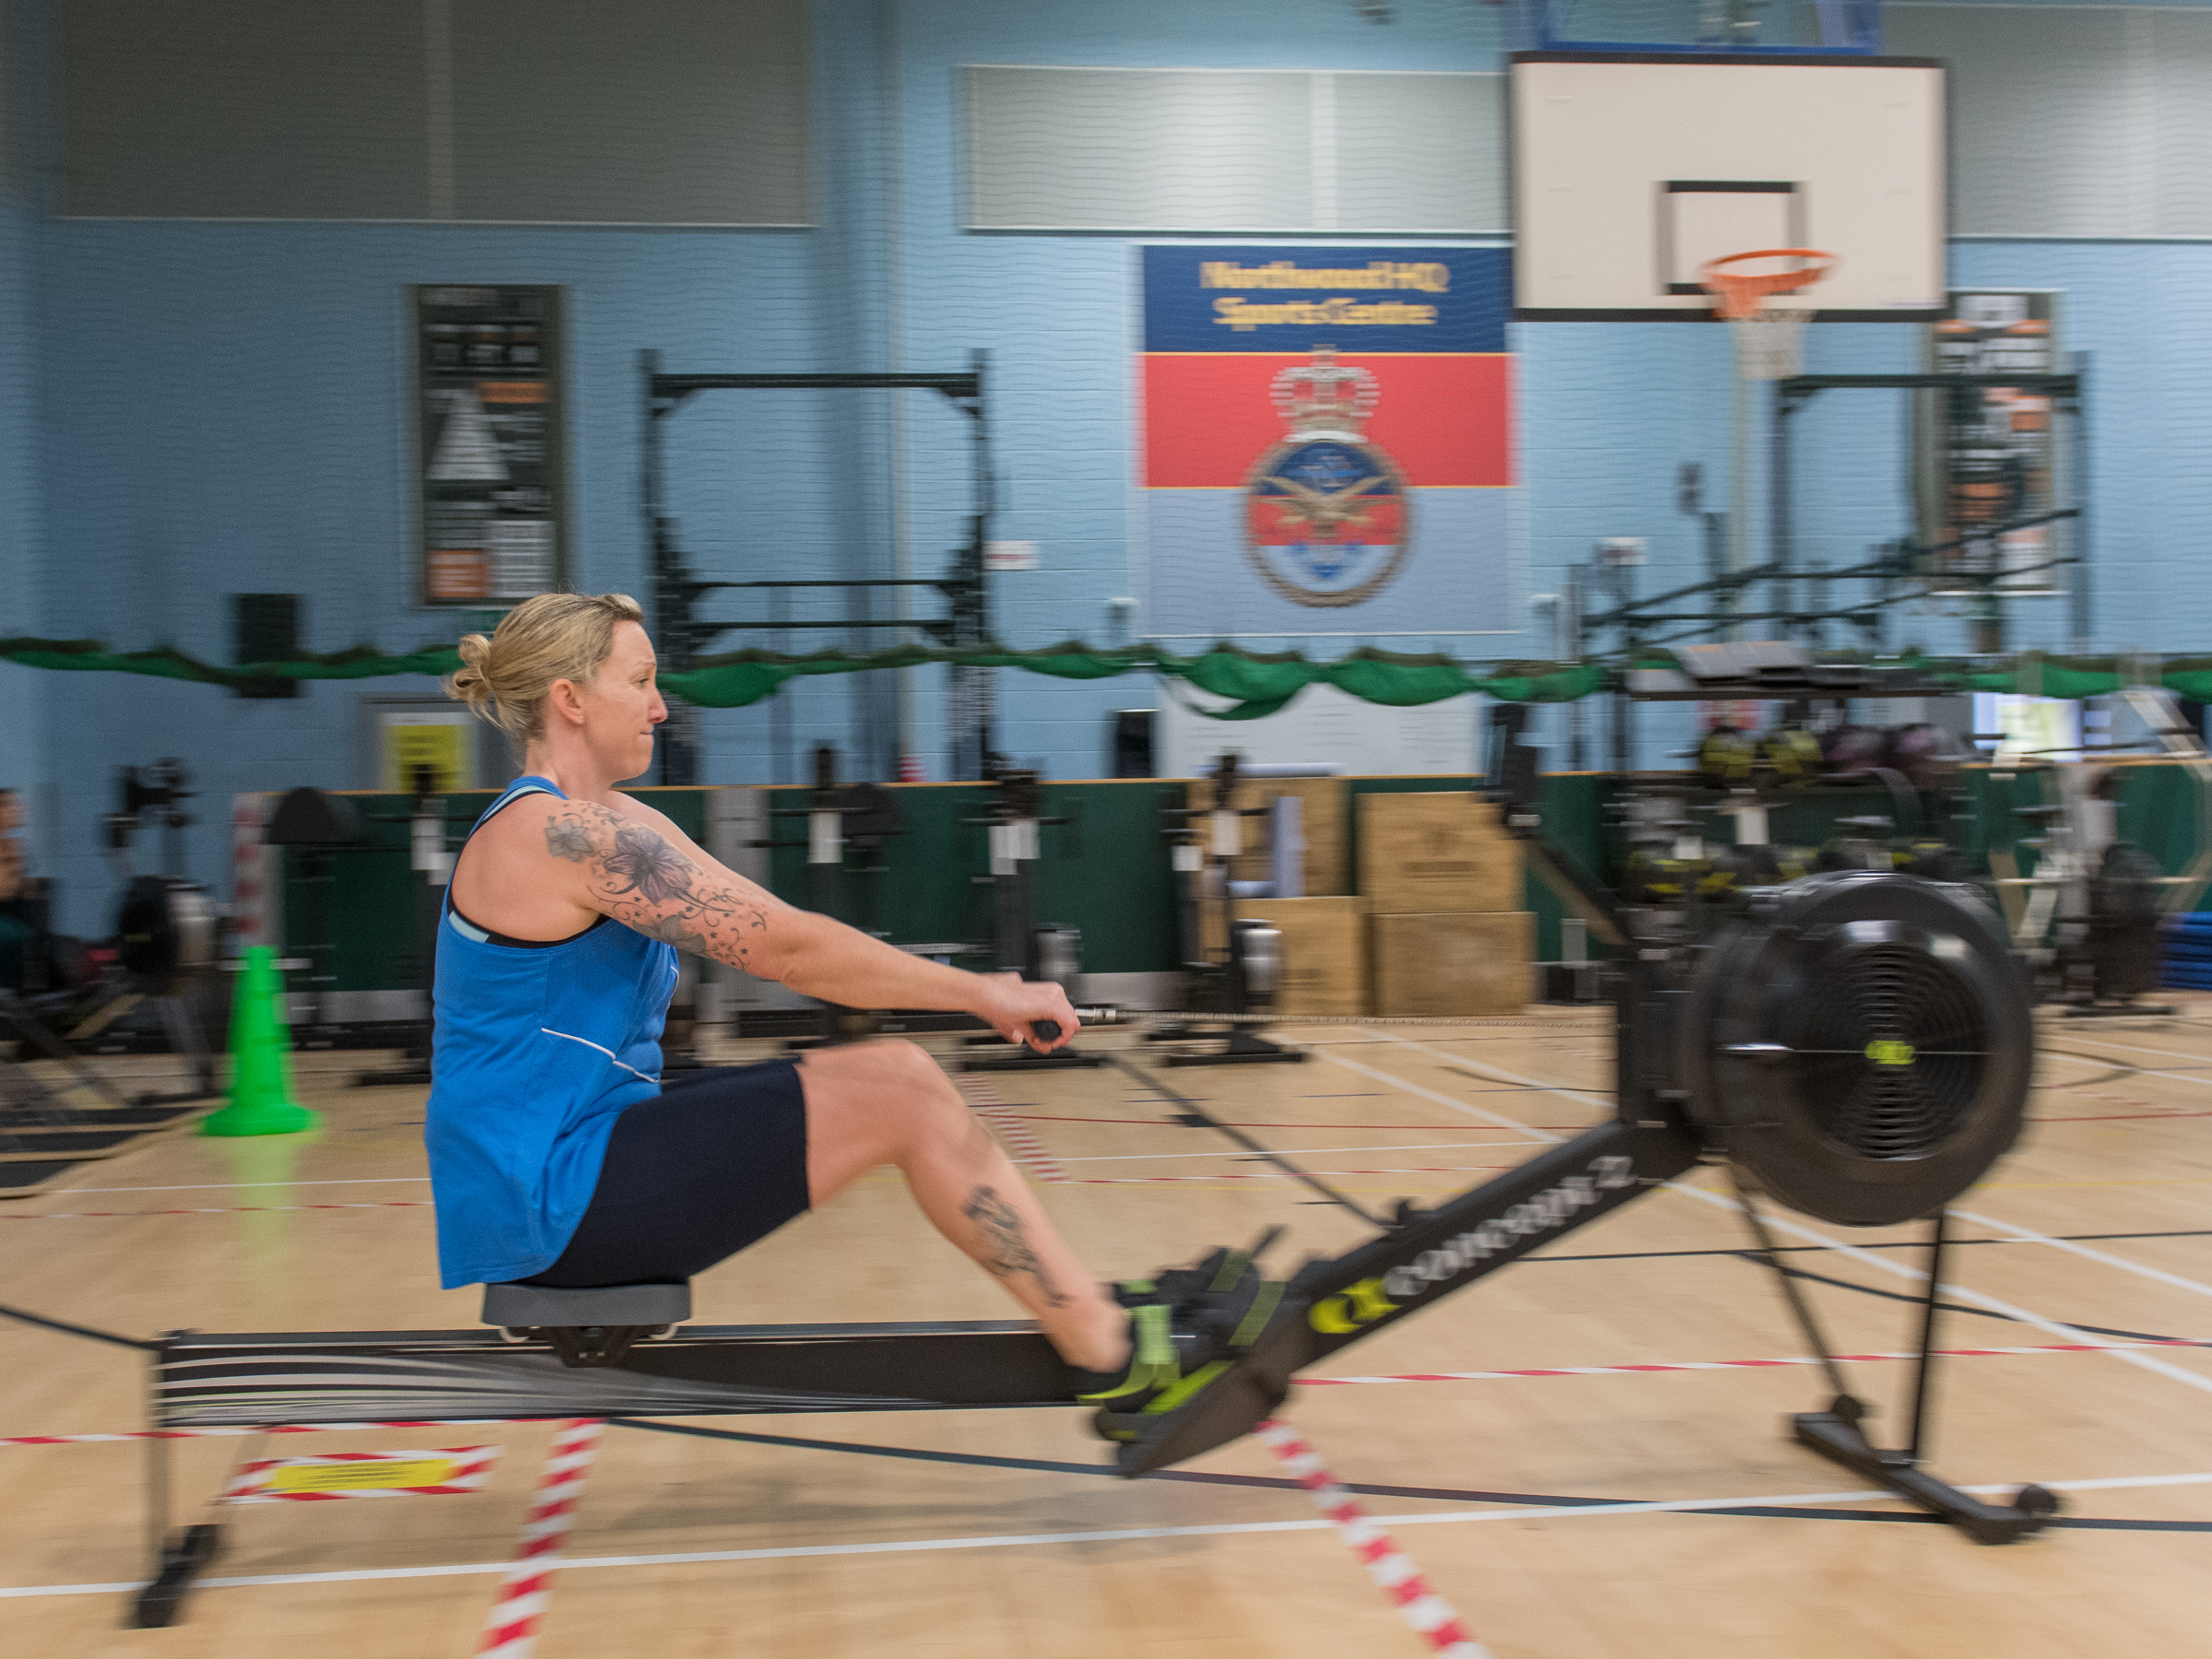 Personnel uses a rowing machine in the gym.